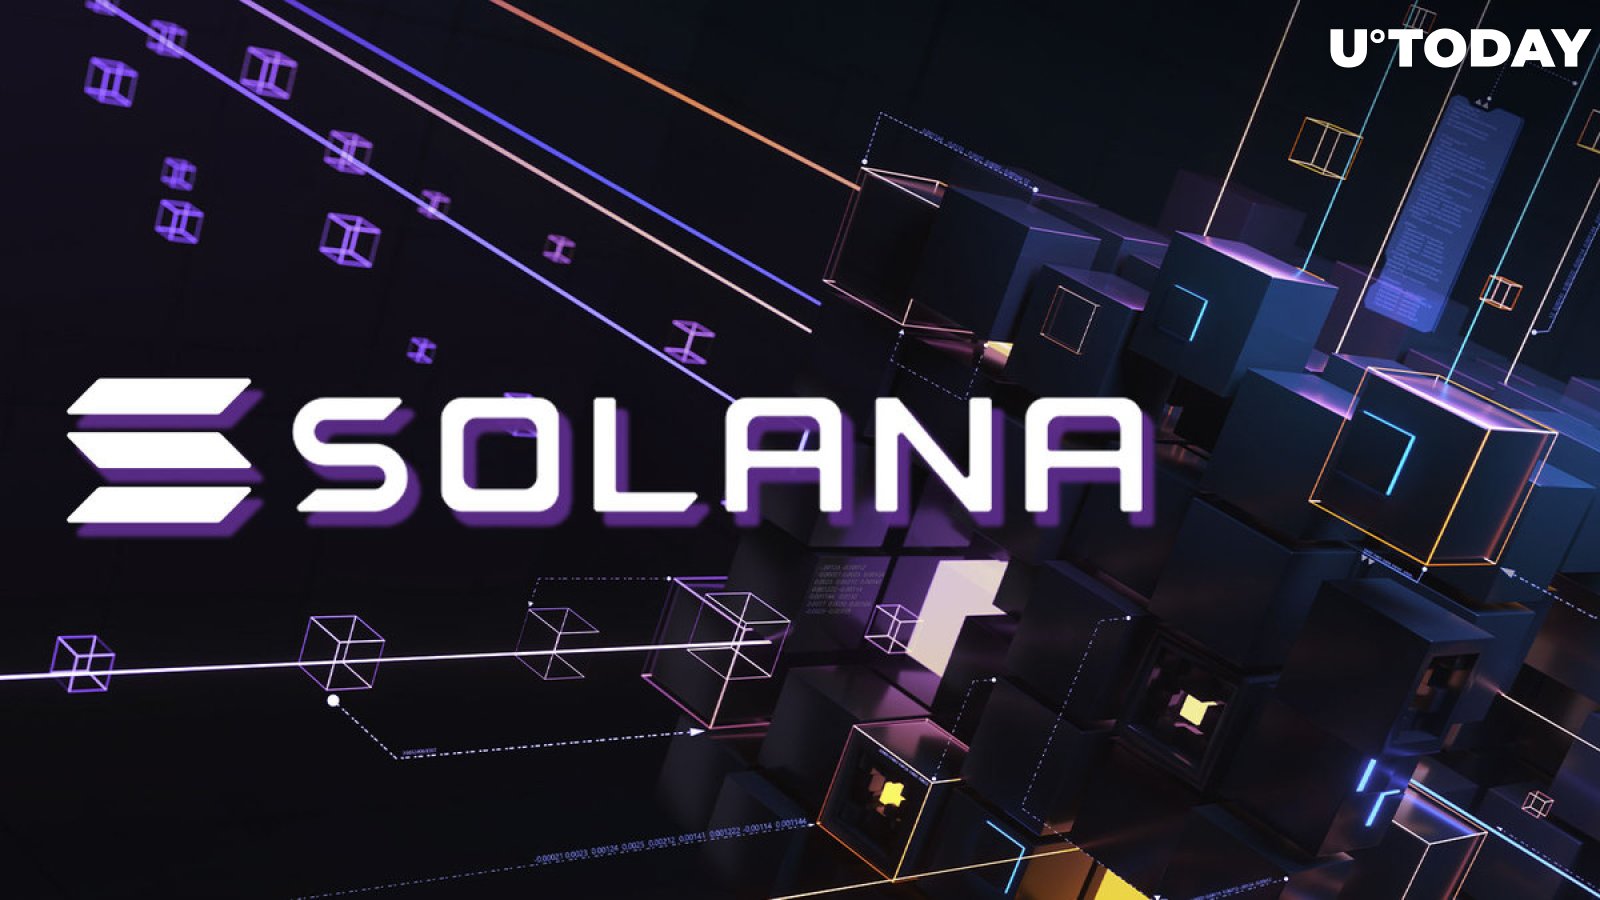 Solana (SOL) Blockchain Down Yet Again: What's Going On?